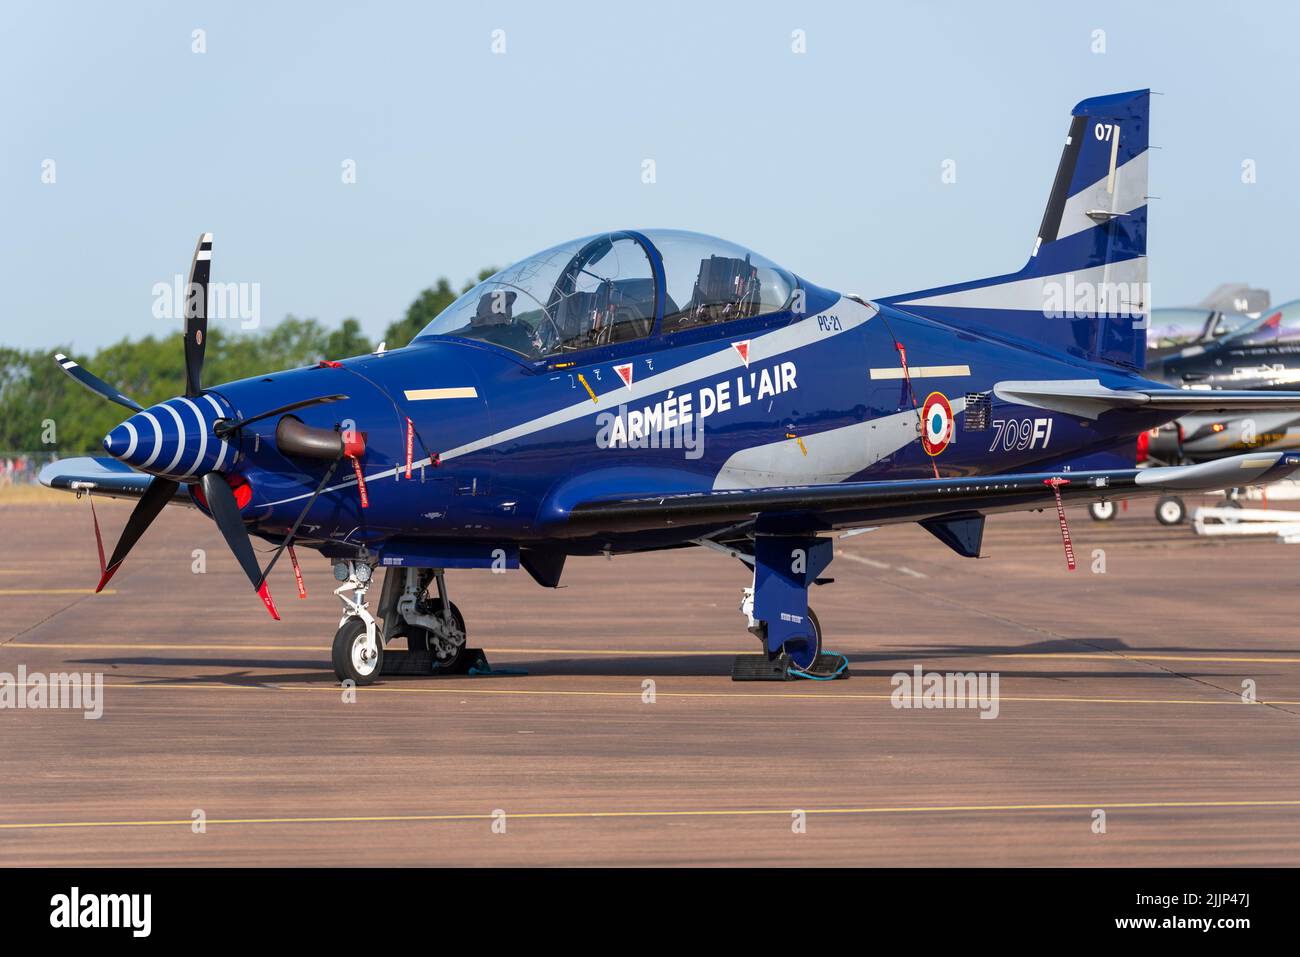 French Air Force Pilatus PC-21 training plane of the Mustang X-Ray Demo Team at the Royal International Air Tattoo, RIAT airshow, RAF Fairford, UK Stock Photo